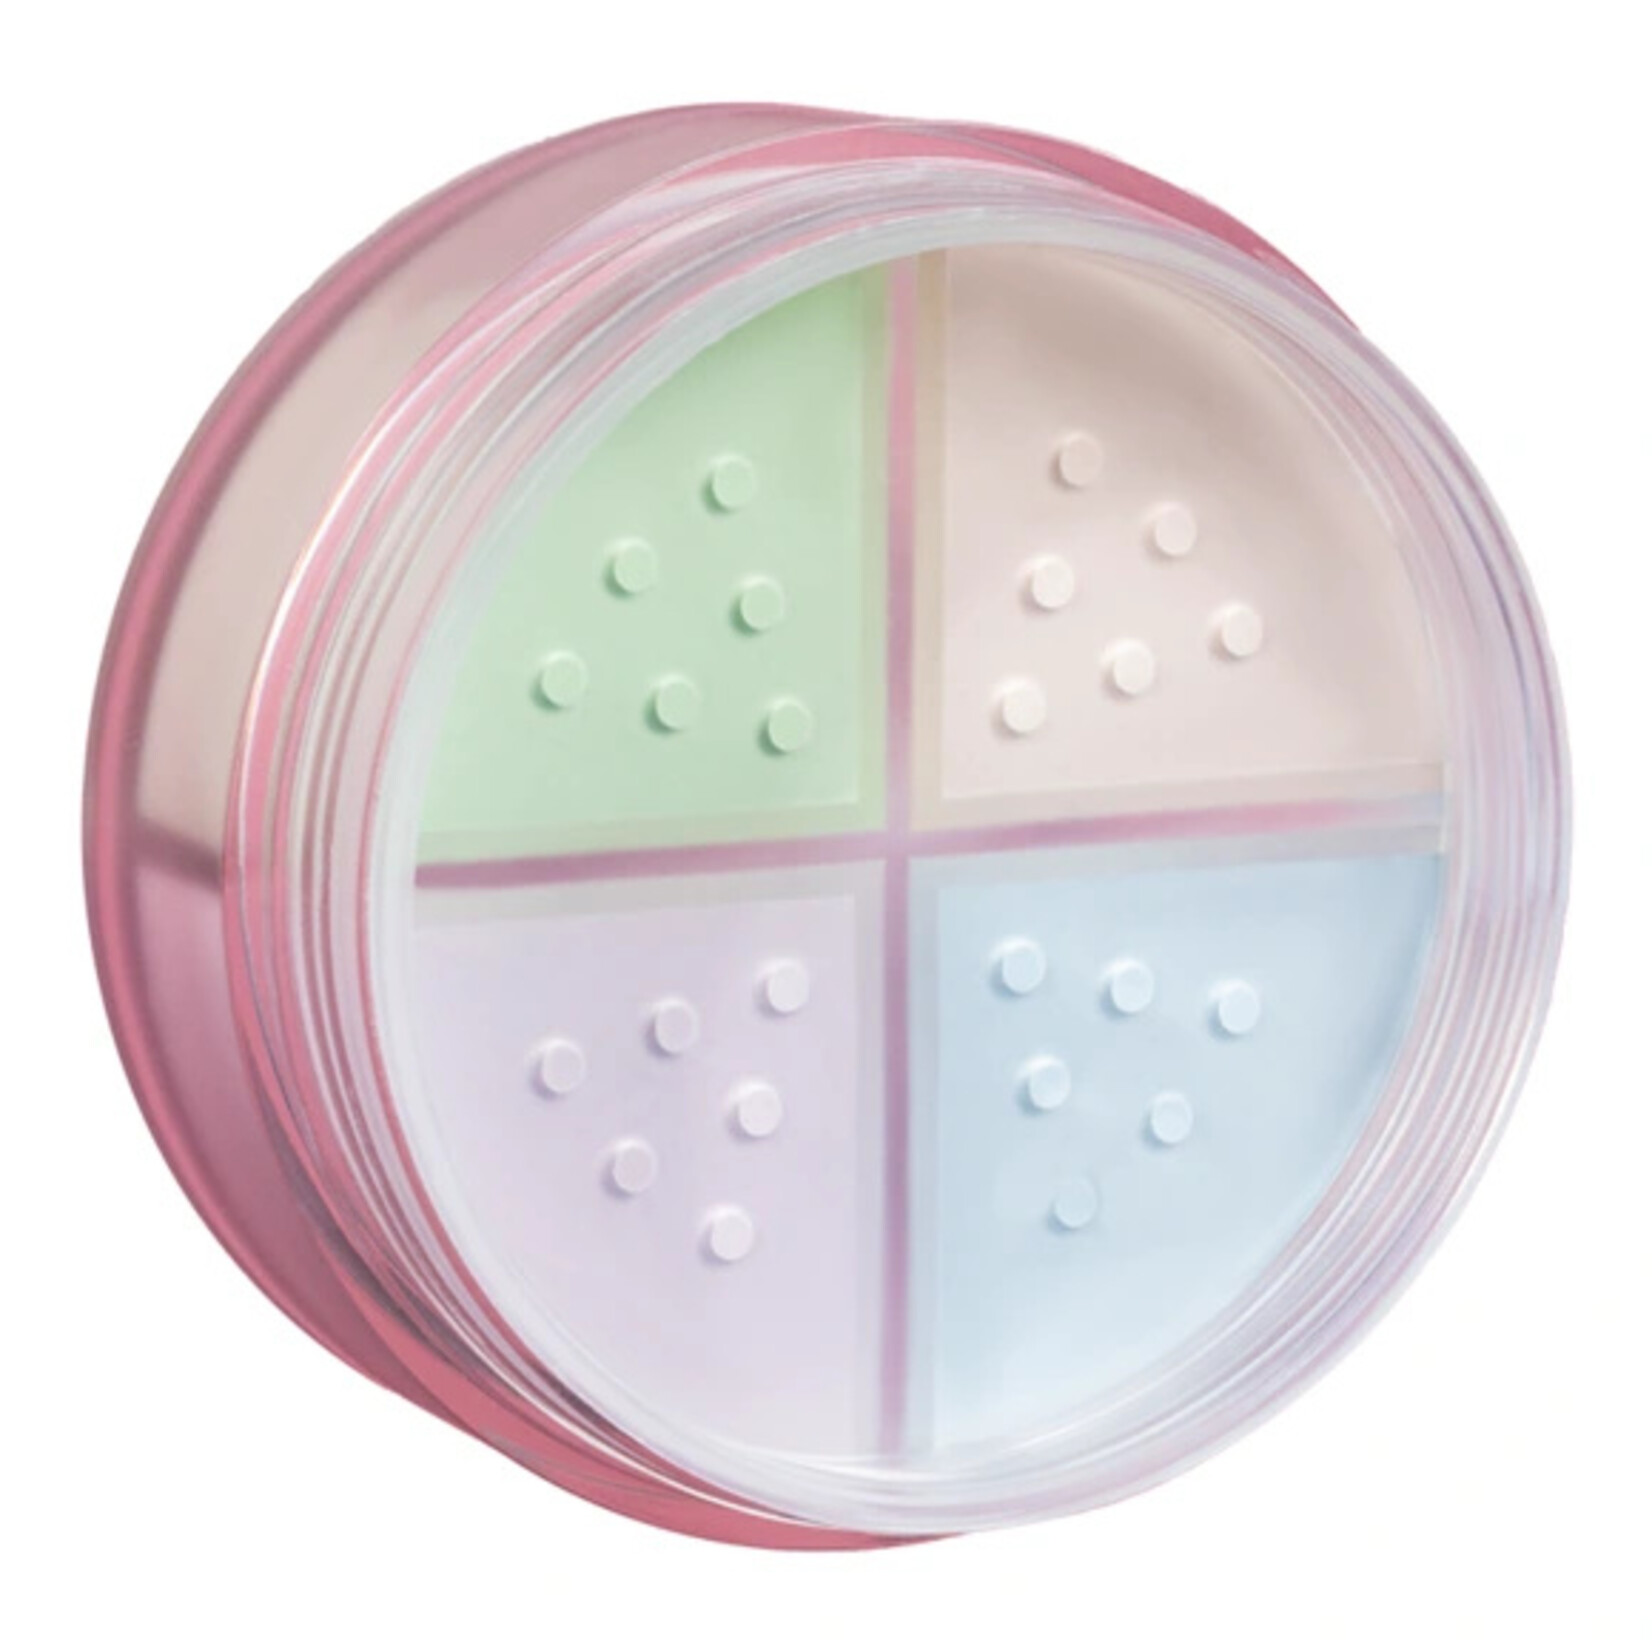 Corrector polvo Pink Up Neutral